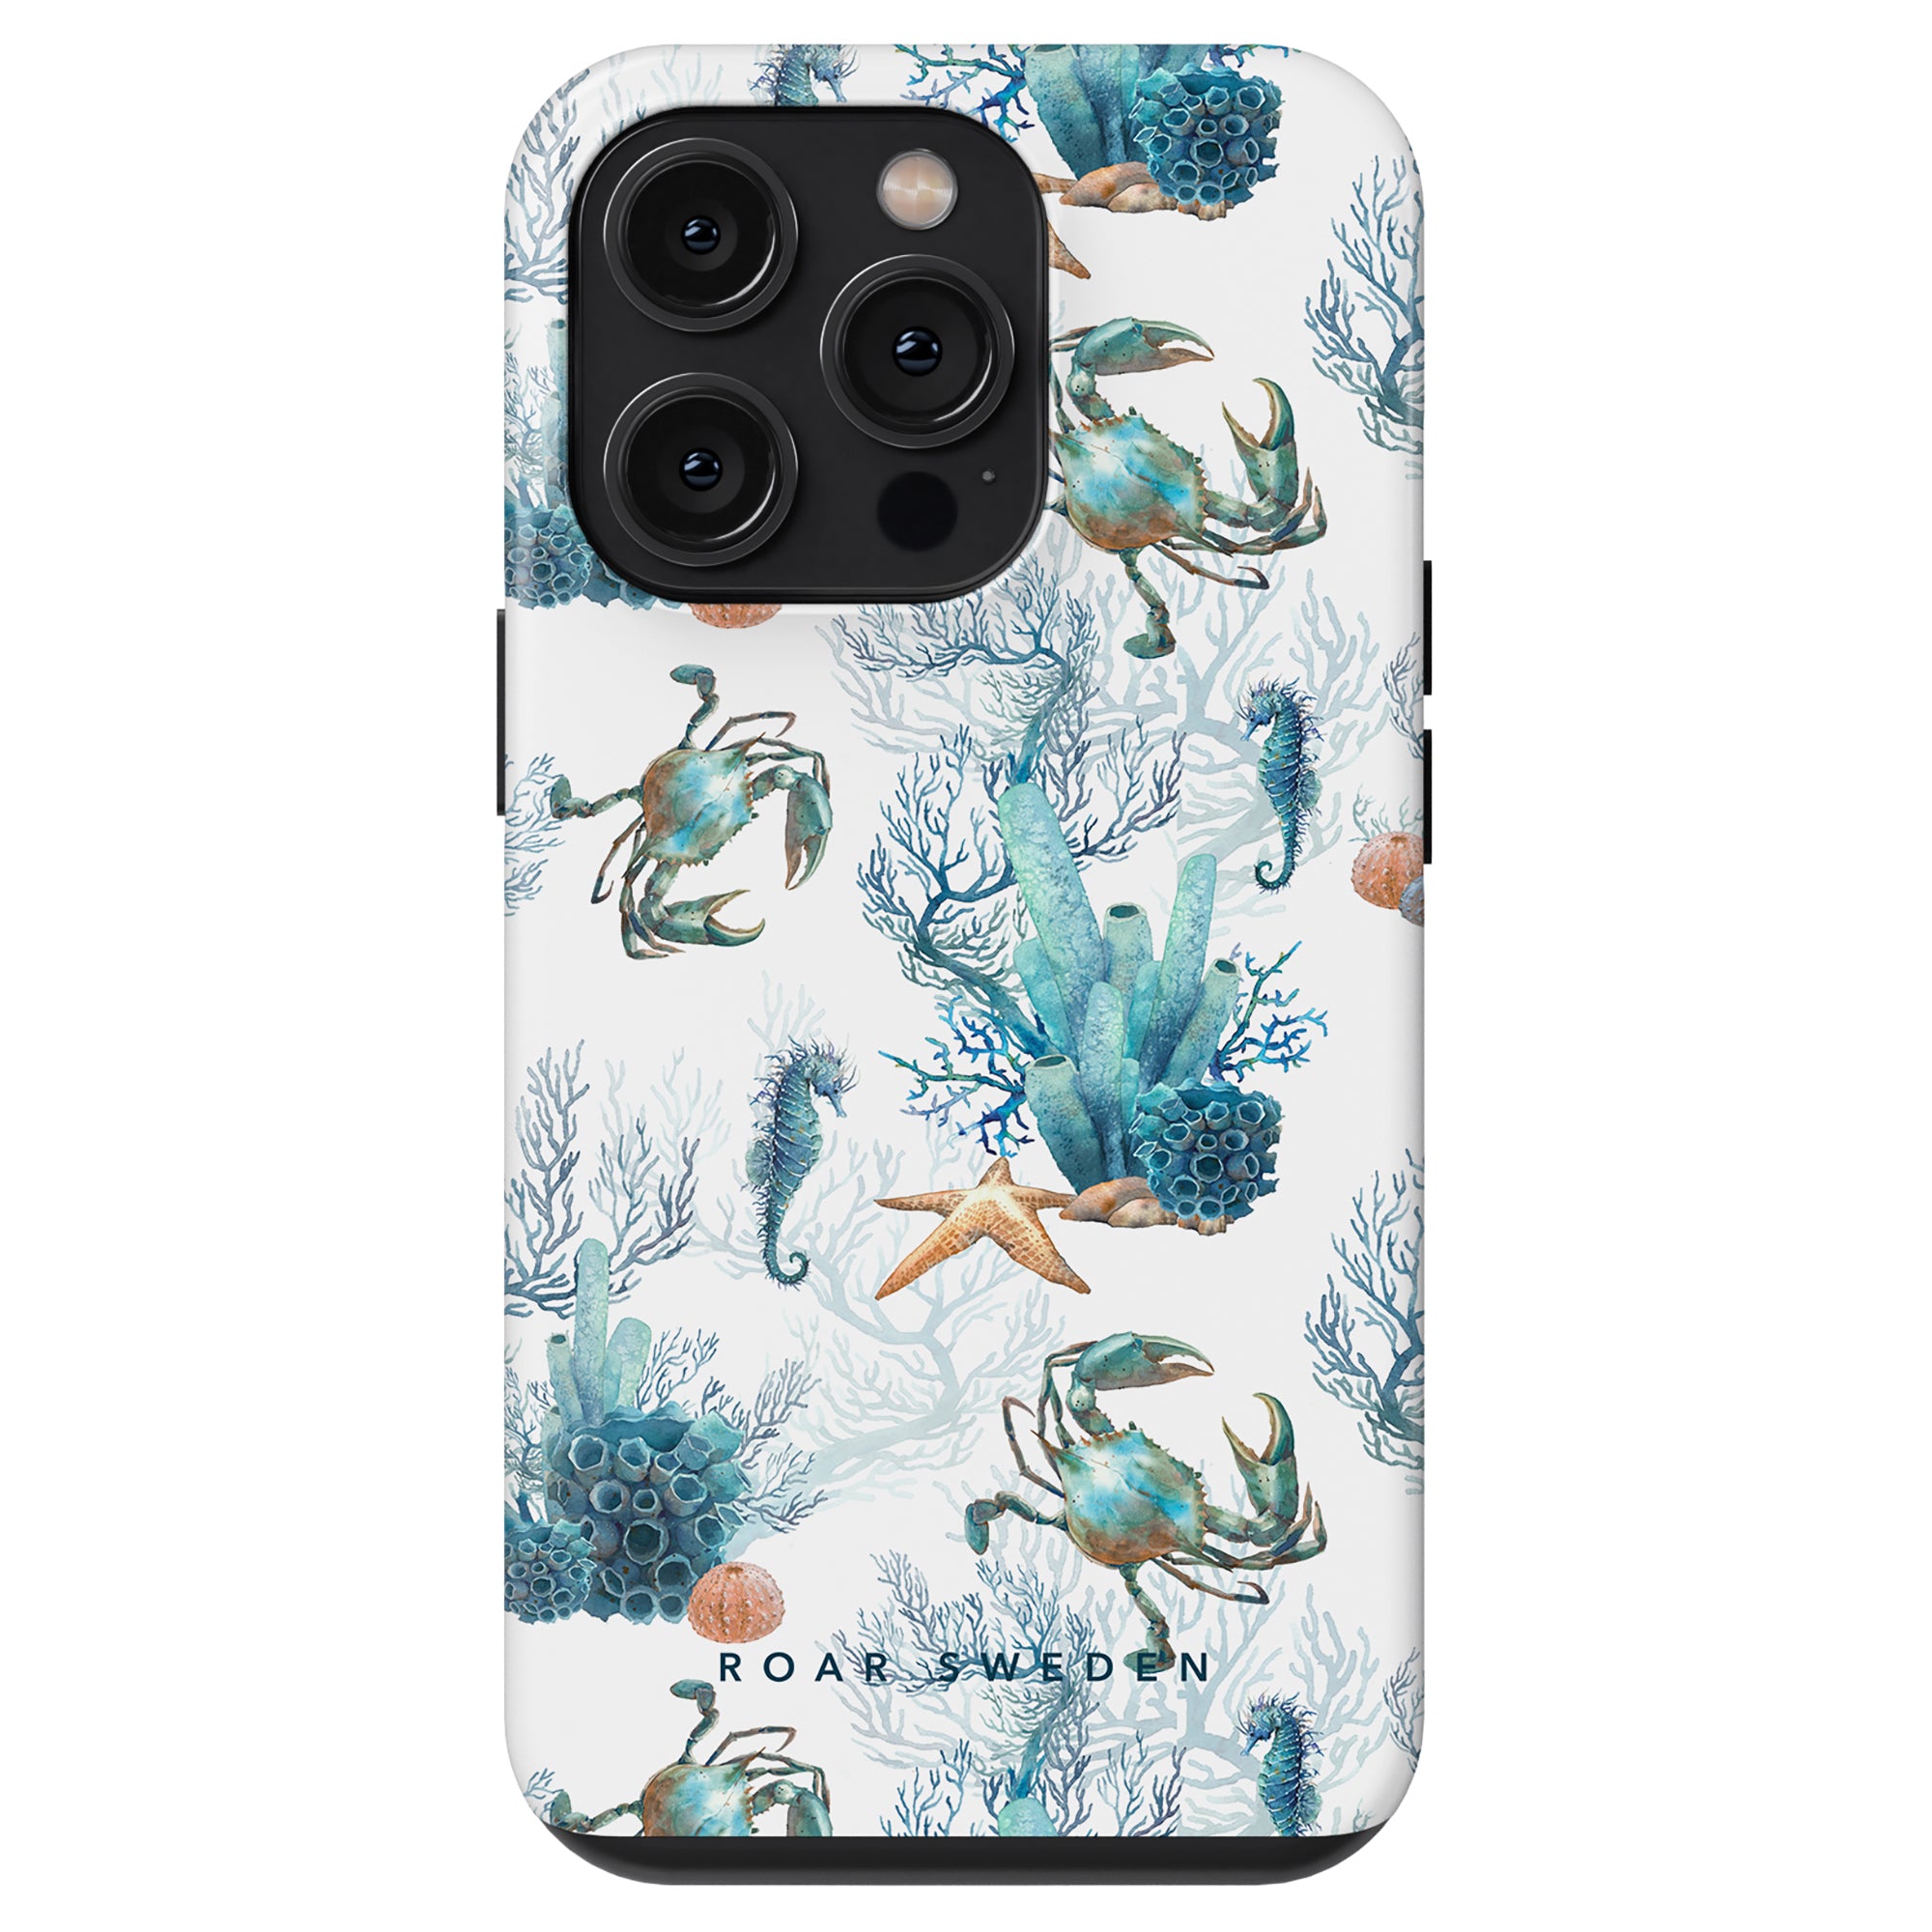 Sentence with Product Name: Smartphone with Crab Reef - Tough Case design from our ocean collection.